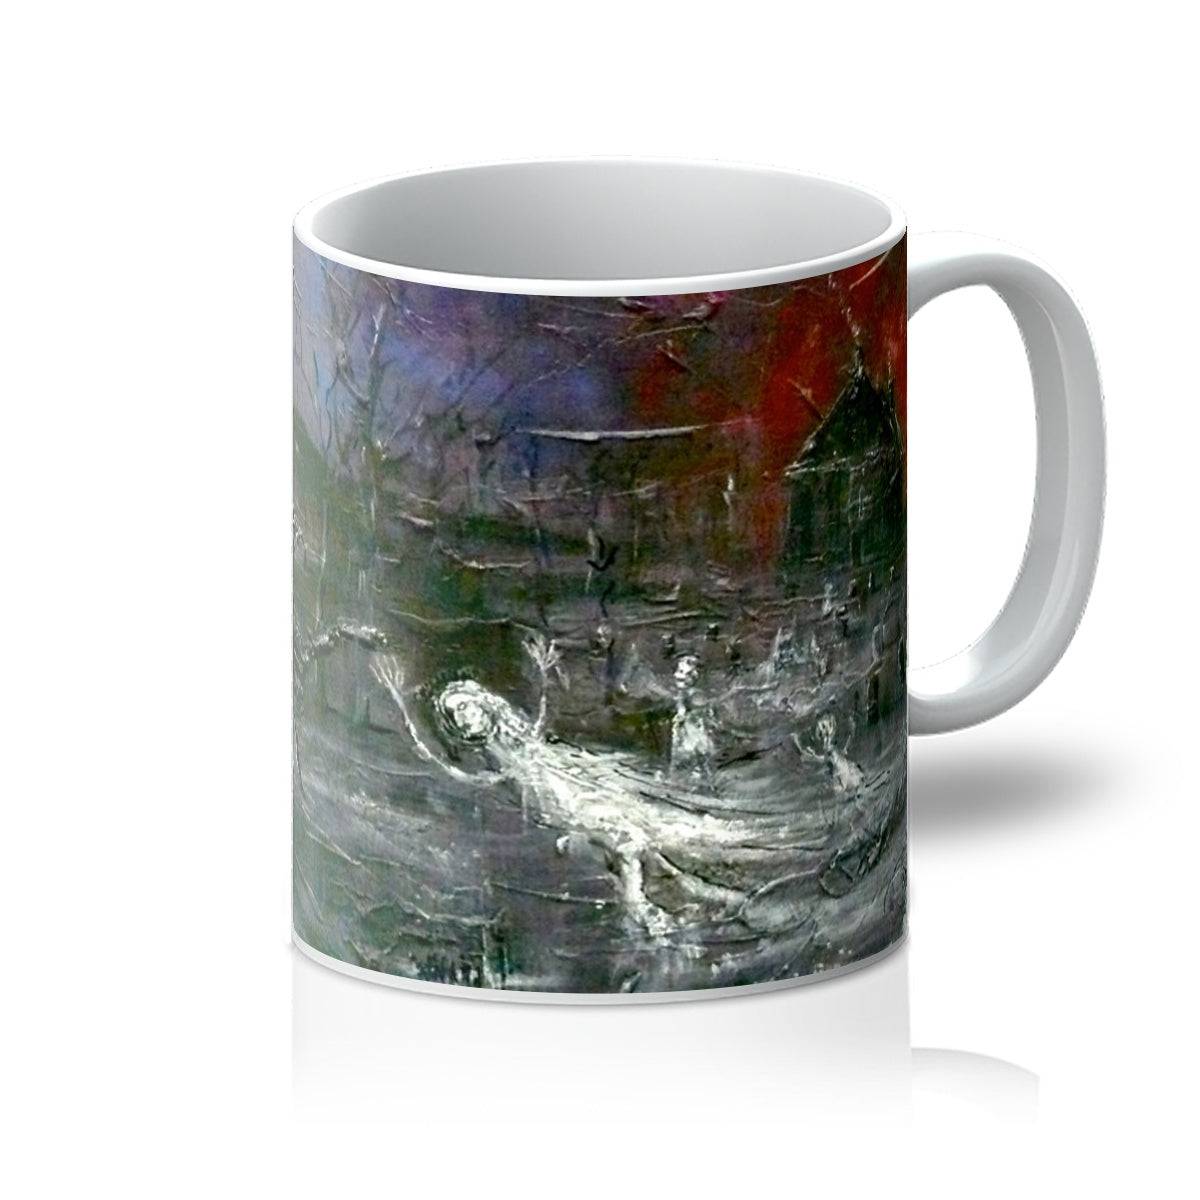 Tam O Shanter Art Gifts Mug-Mugs-Abstract & Impressionistic Art Gallery-11oz-White-Paintings, Prints, Homeware, Art Gifts From Scotland By Scottish Artist Kevin Hunter